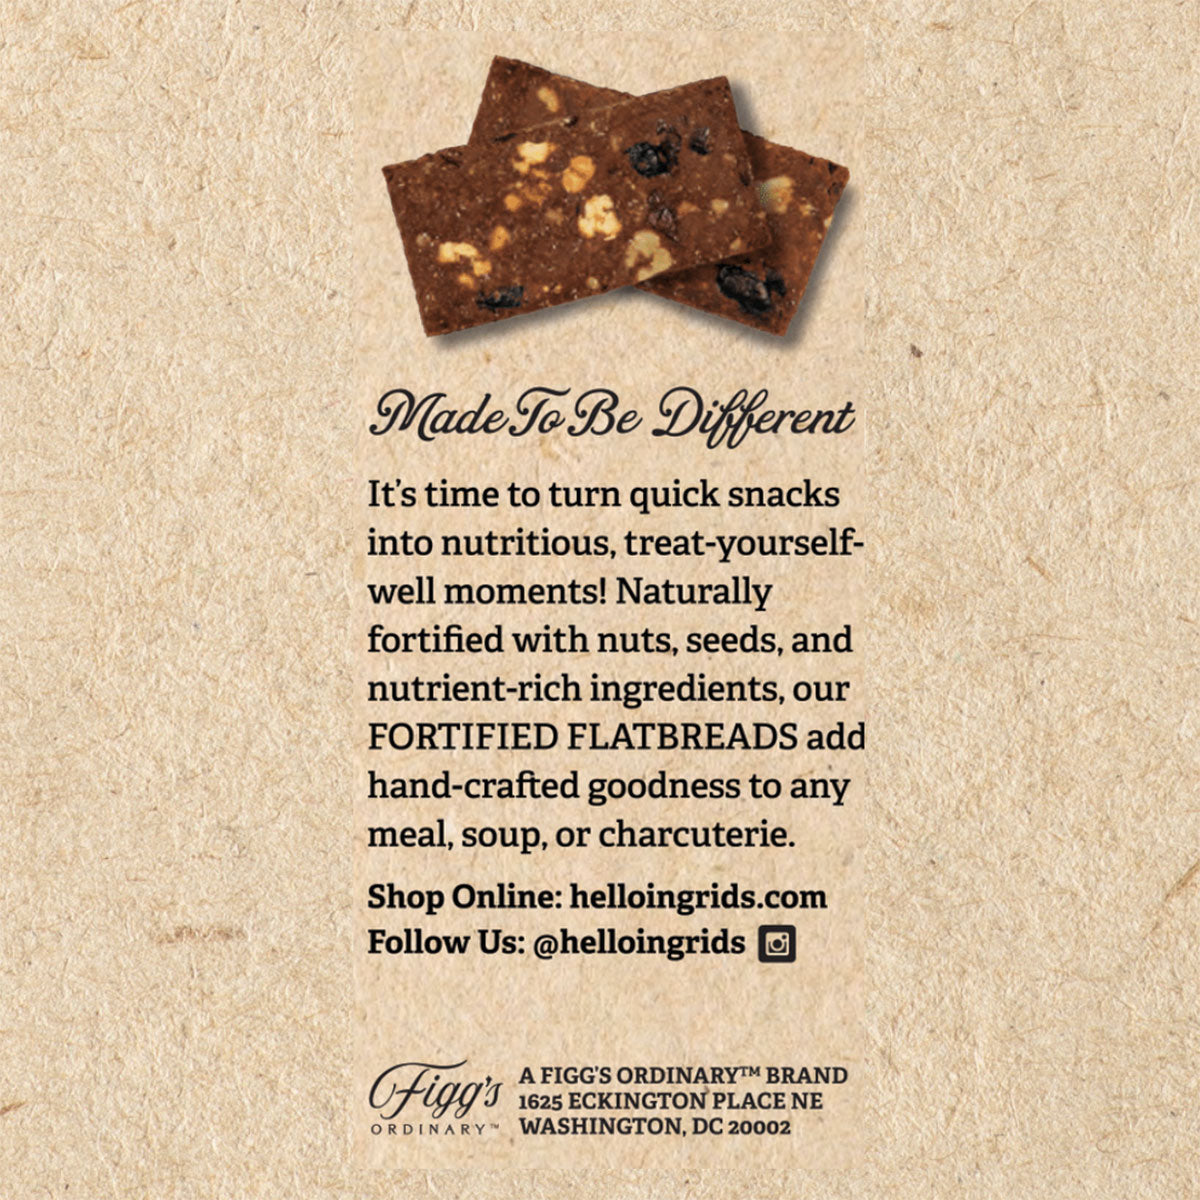 Graphic of the side of the Hazelnut & Cacao fortified flatbread packaging sharing their history, and where to shop